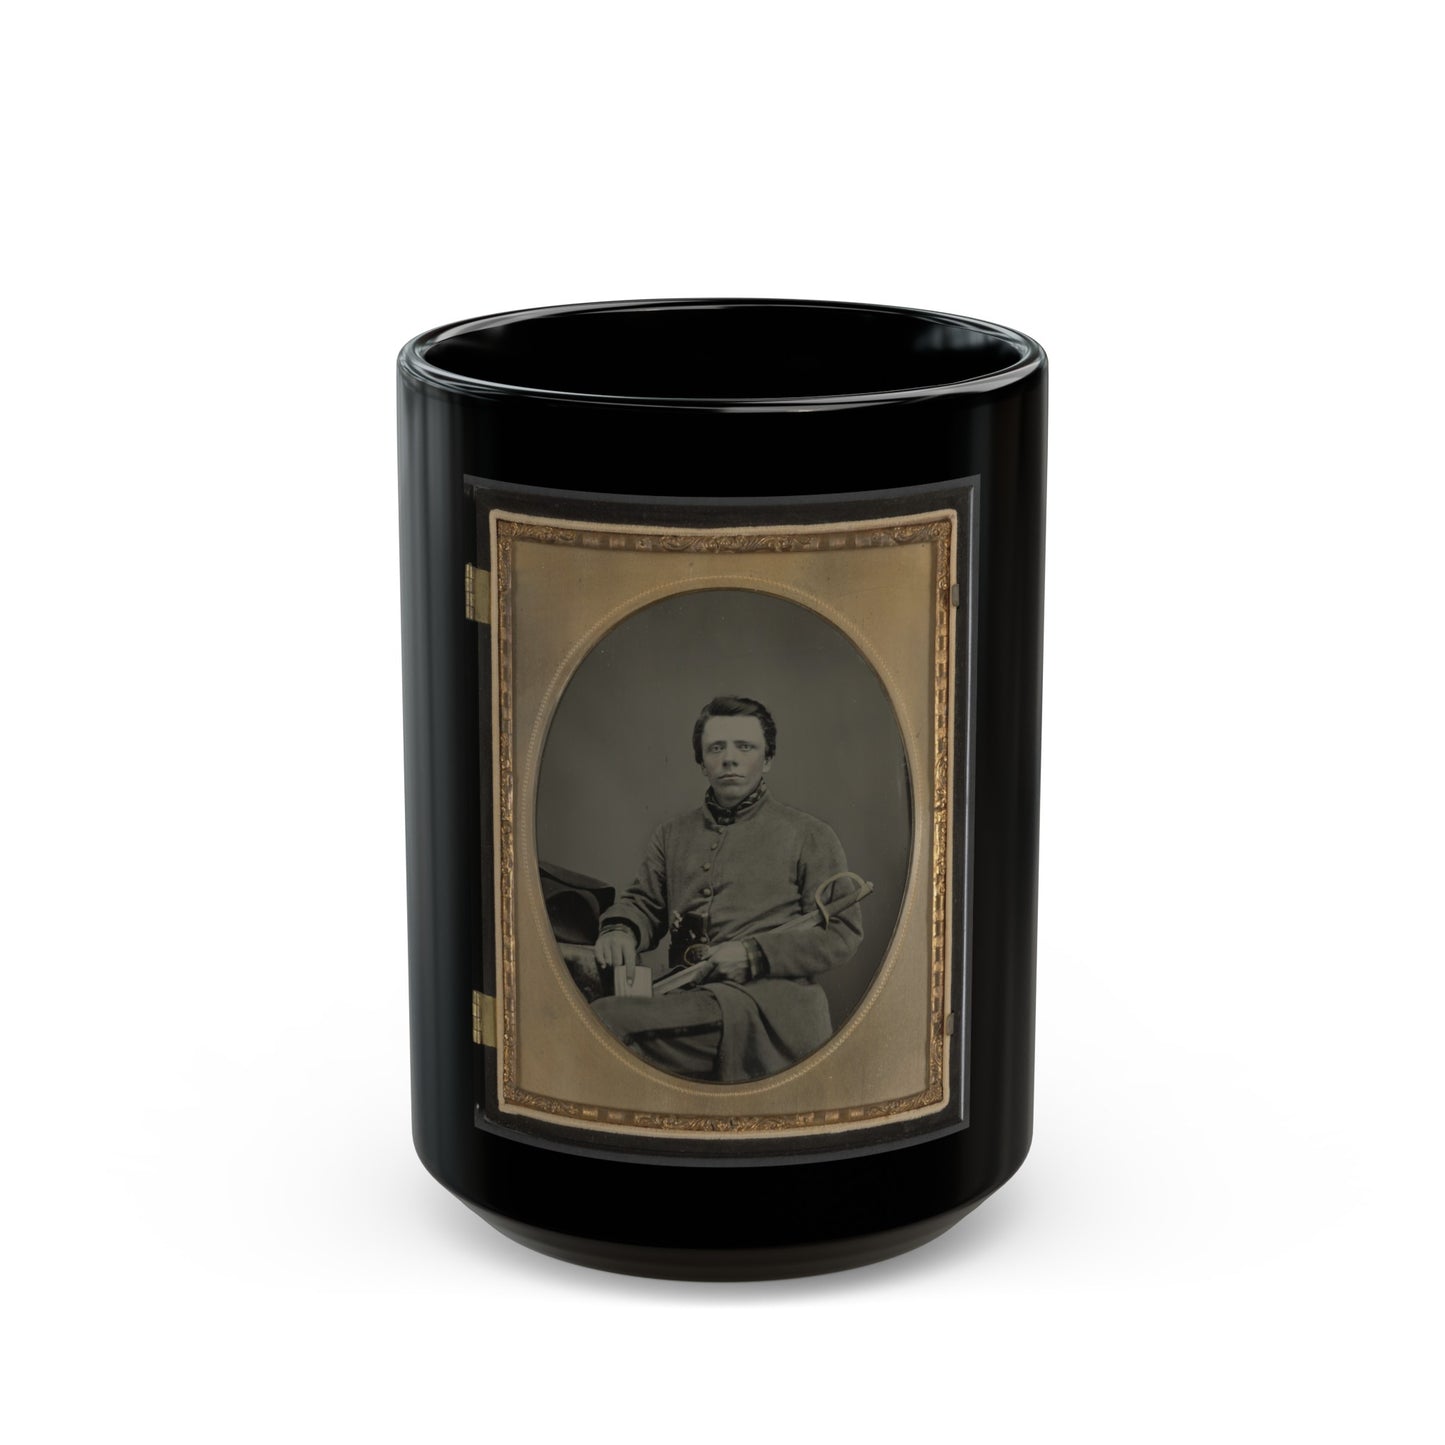 Private W.R. Clack Of Co. B, 43rd Tennessee Infantry Regiment, With Saber, Pistol, And Small Book (U.S. Civil War) Black Coffee Mug